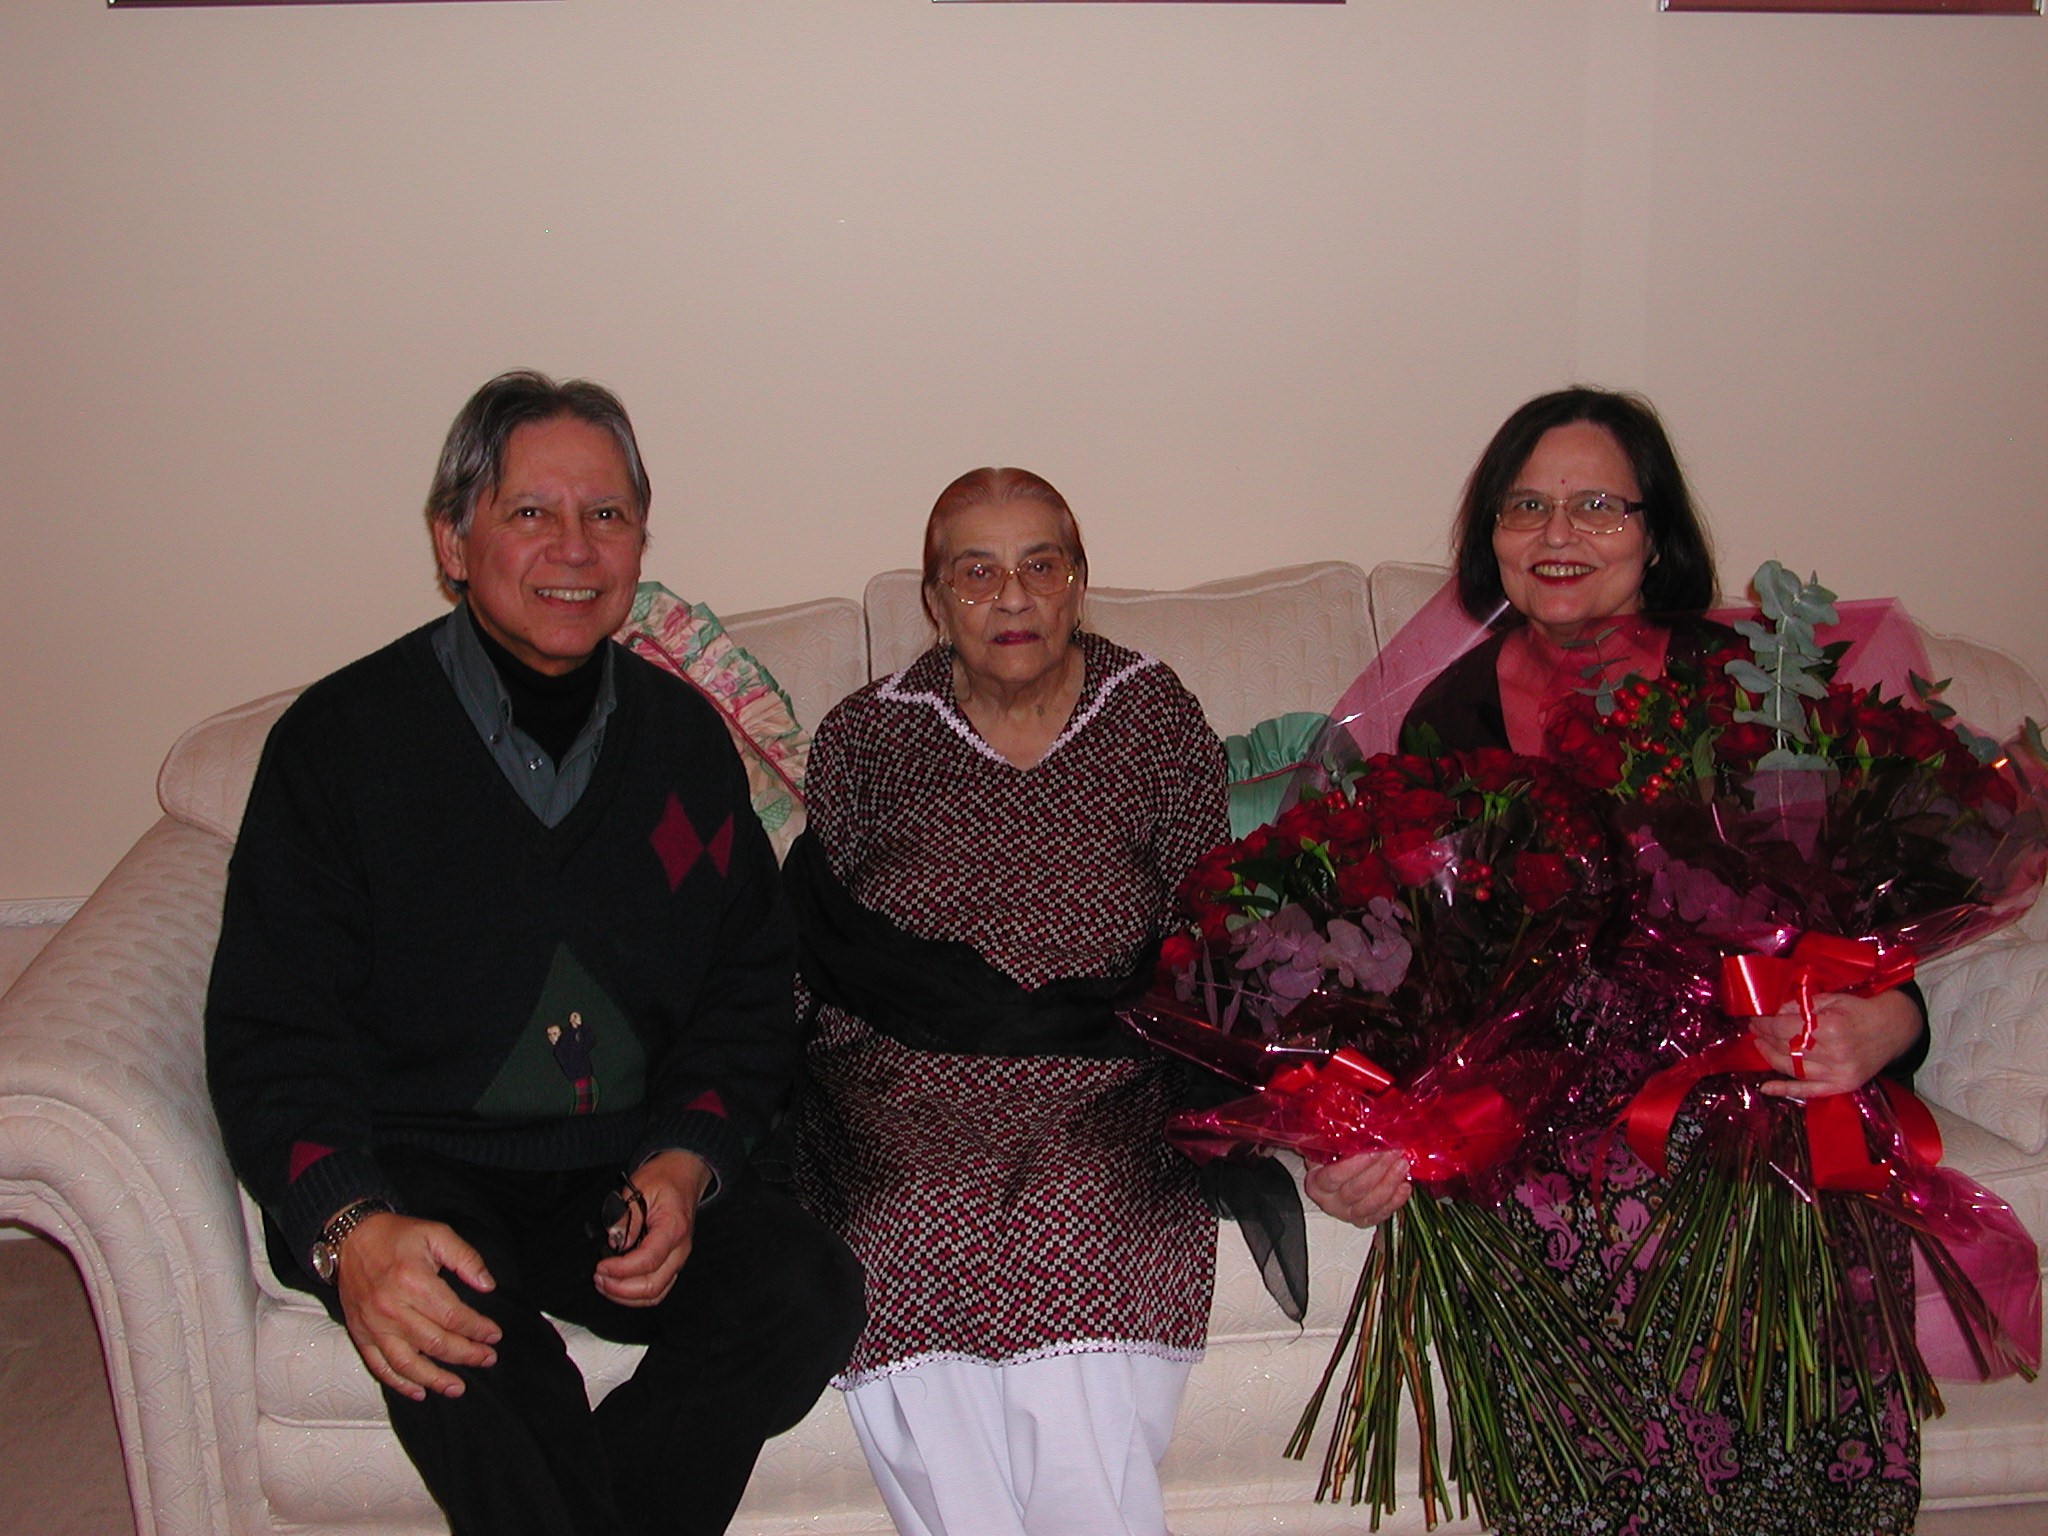 Fatima on her 90th birthday with her daughter and son-in-law